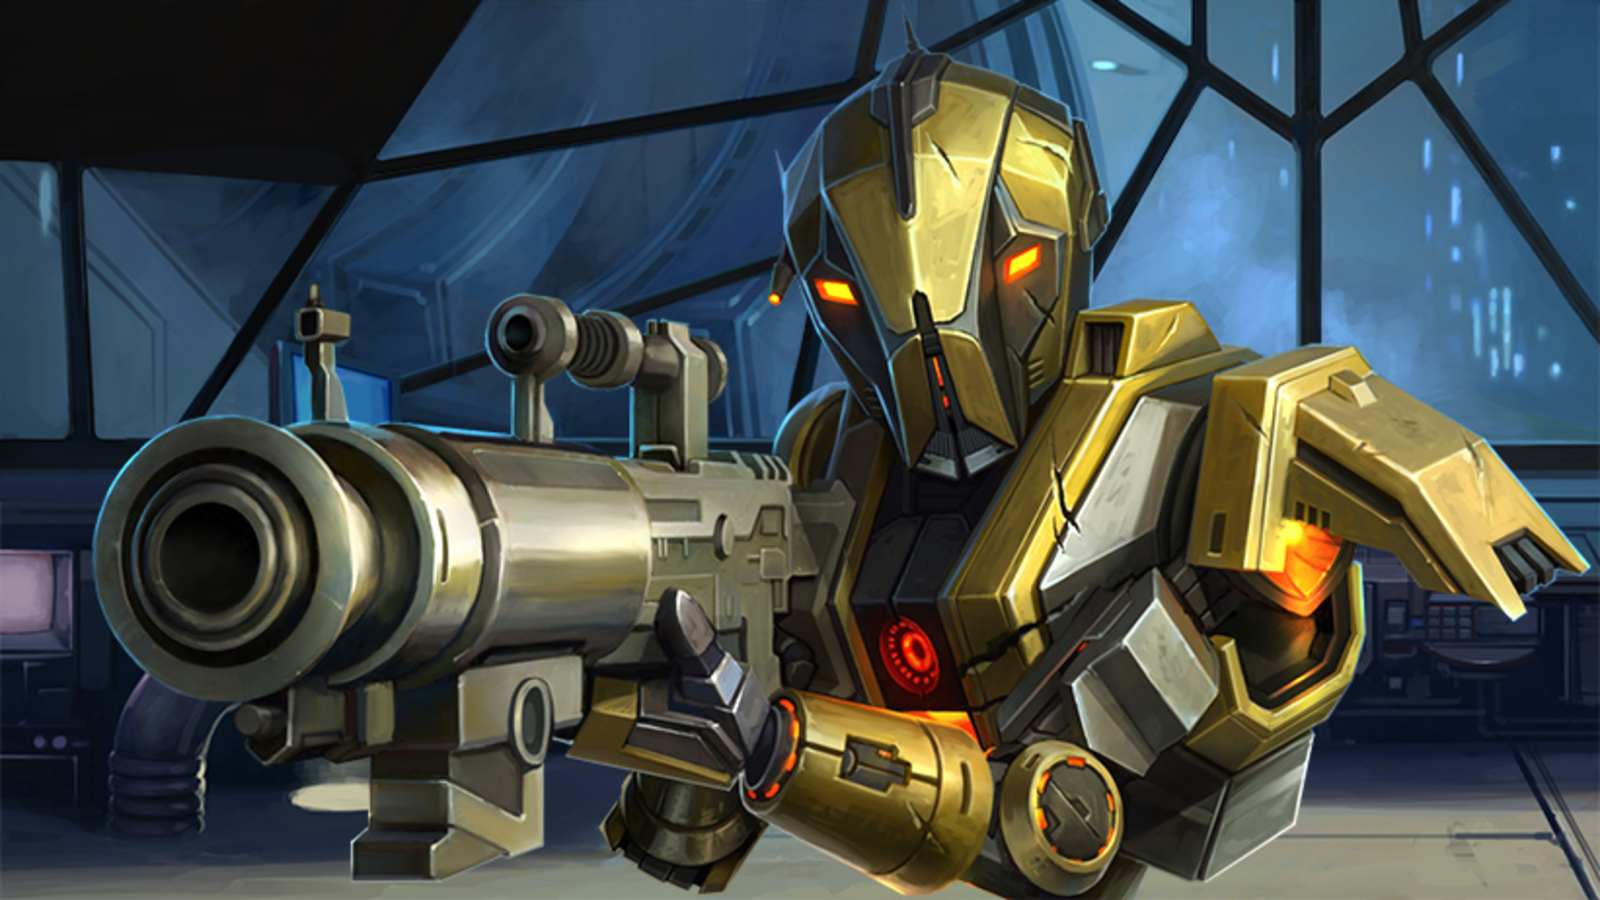 SWTOR Players Will Start Earning HK 55 Assassin Droid Themed Rewards In February